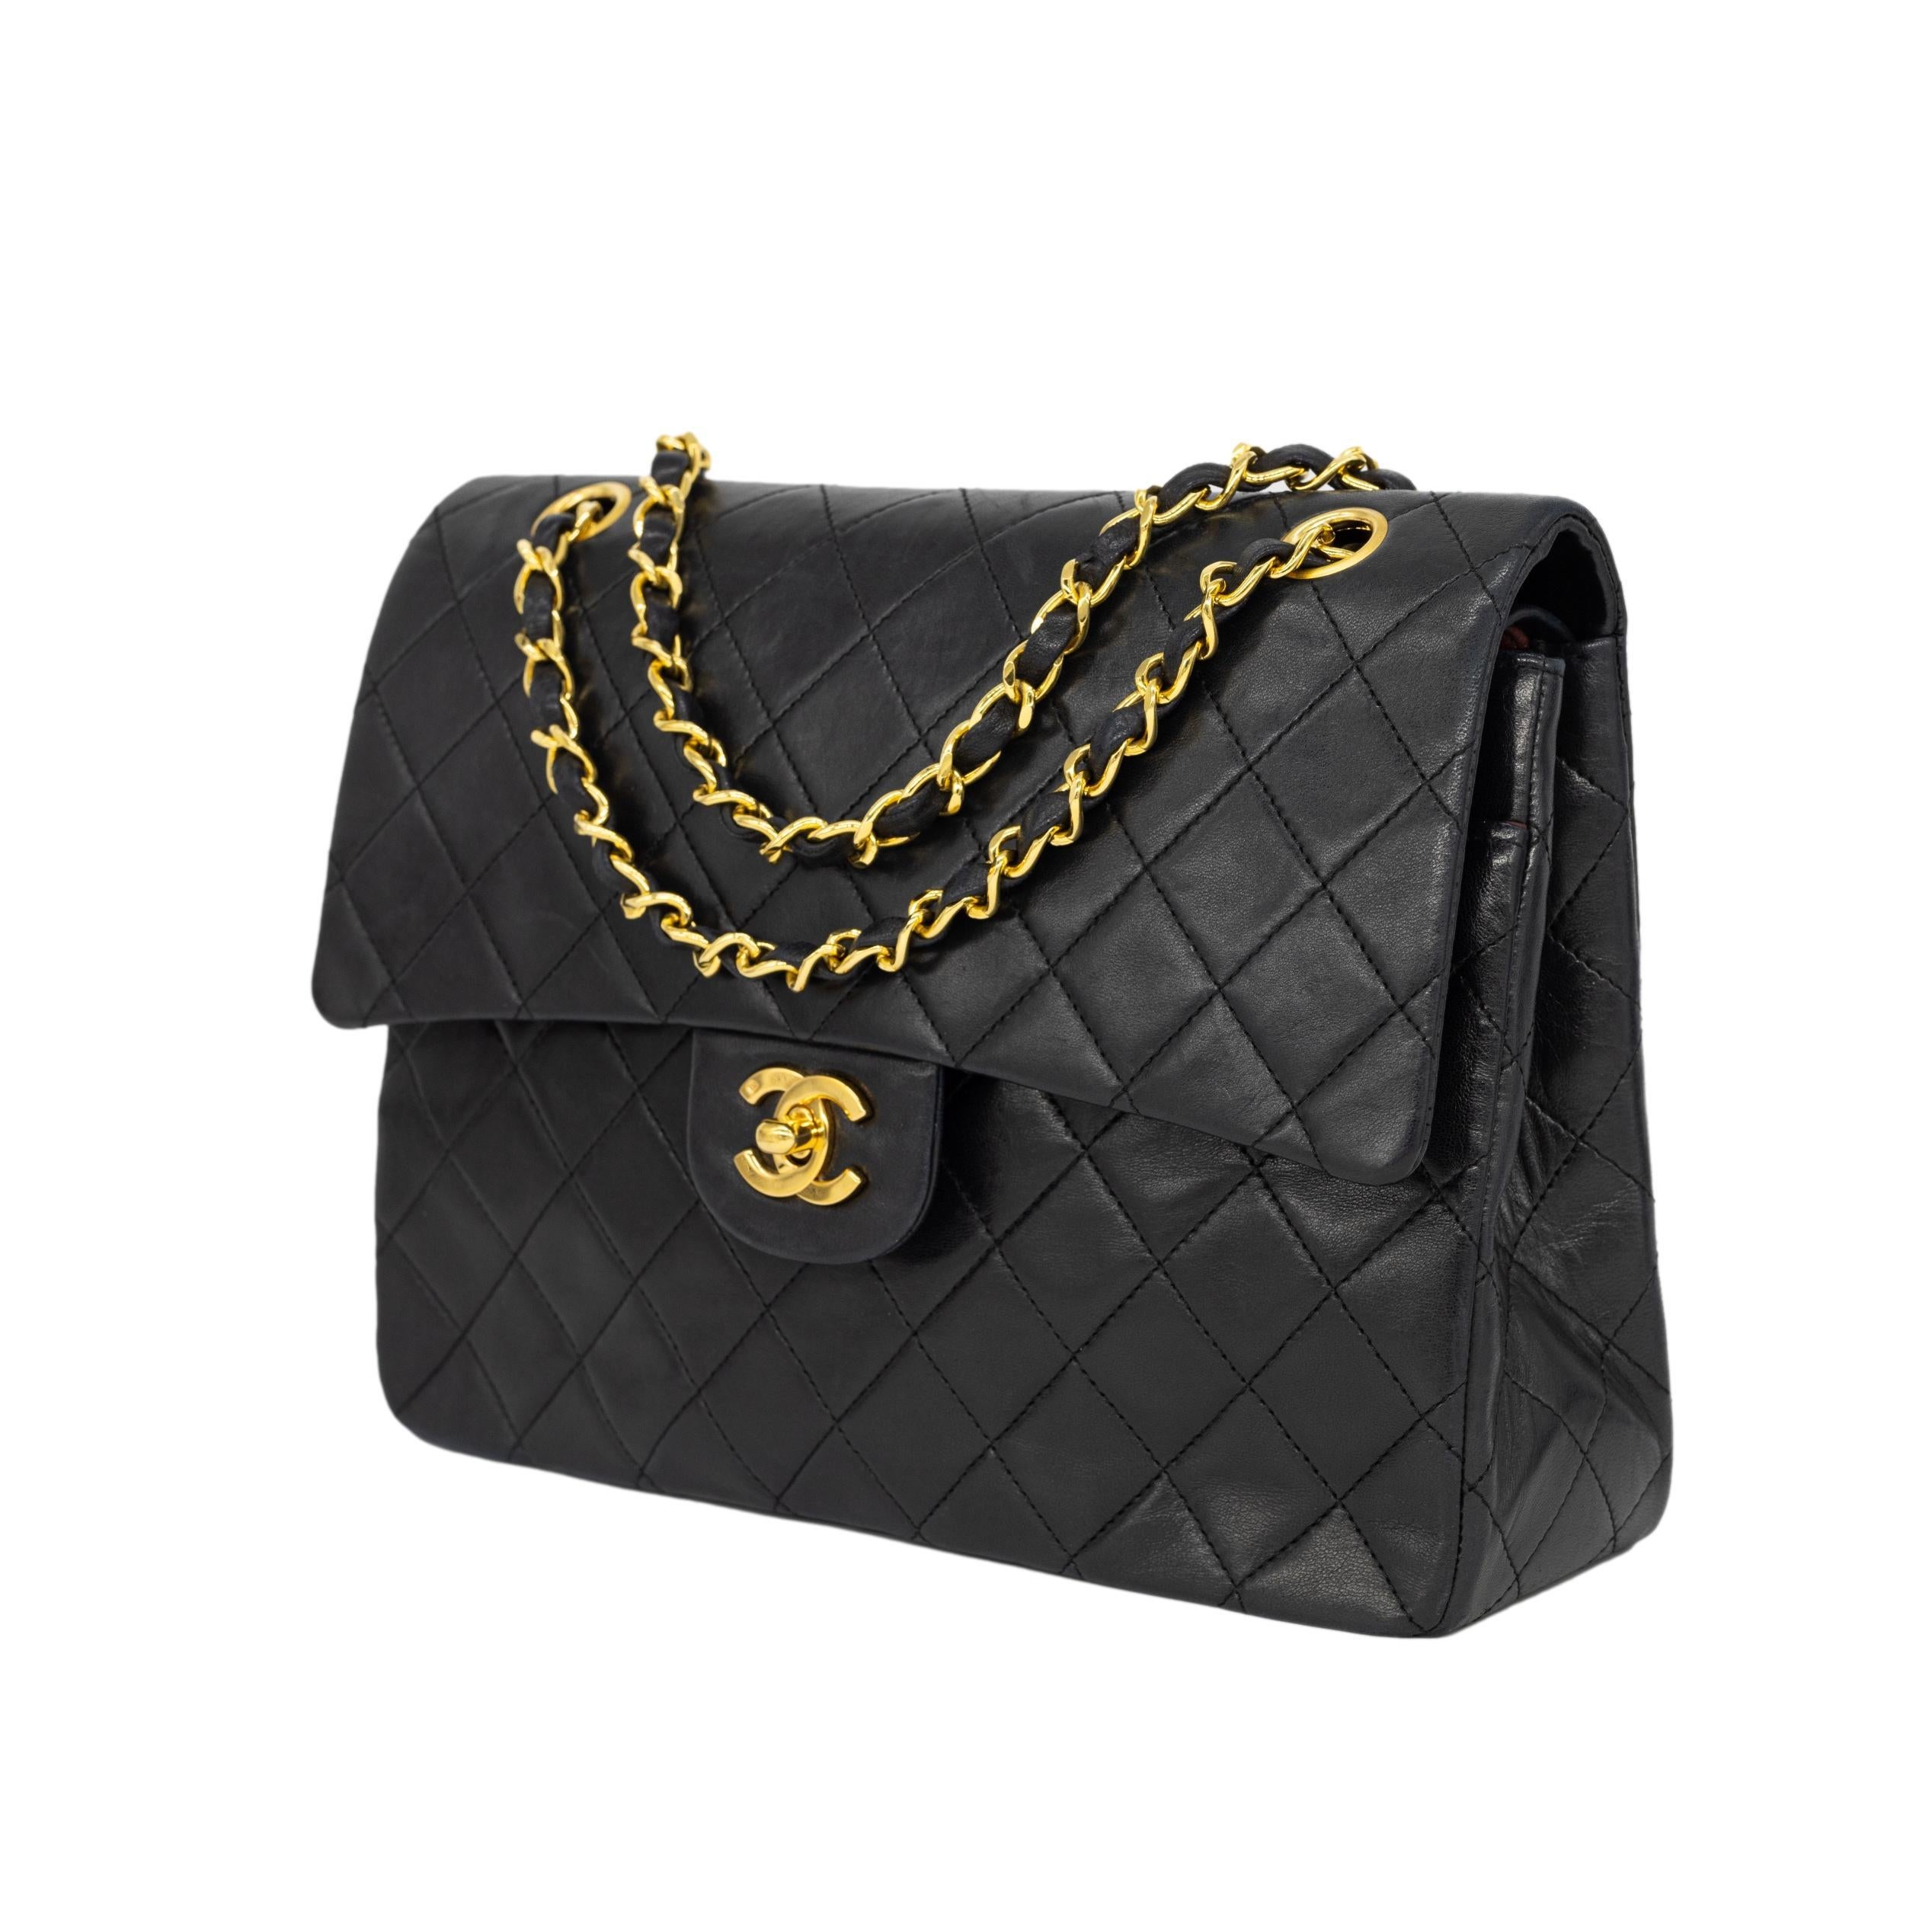 Chanel Black Tall Lambskin Double Flap Mademoiselle Chain Shoulder Bag, 1989 - 1991. The iconic Chanel bag was originally issued by Coco Chanel in February 1955 which became the very first socially acceptable shoulder bag for the modern day woman of